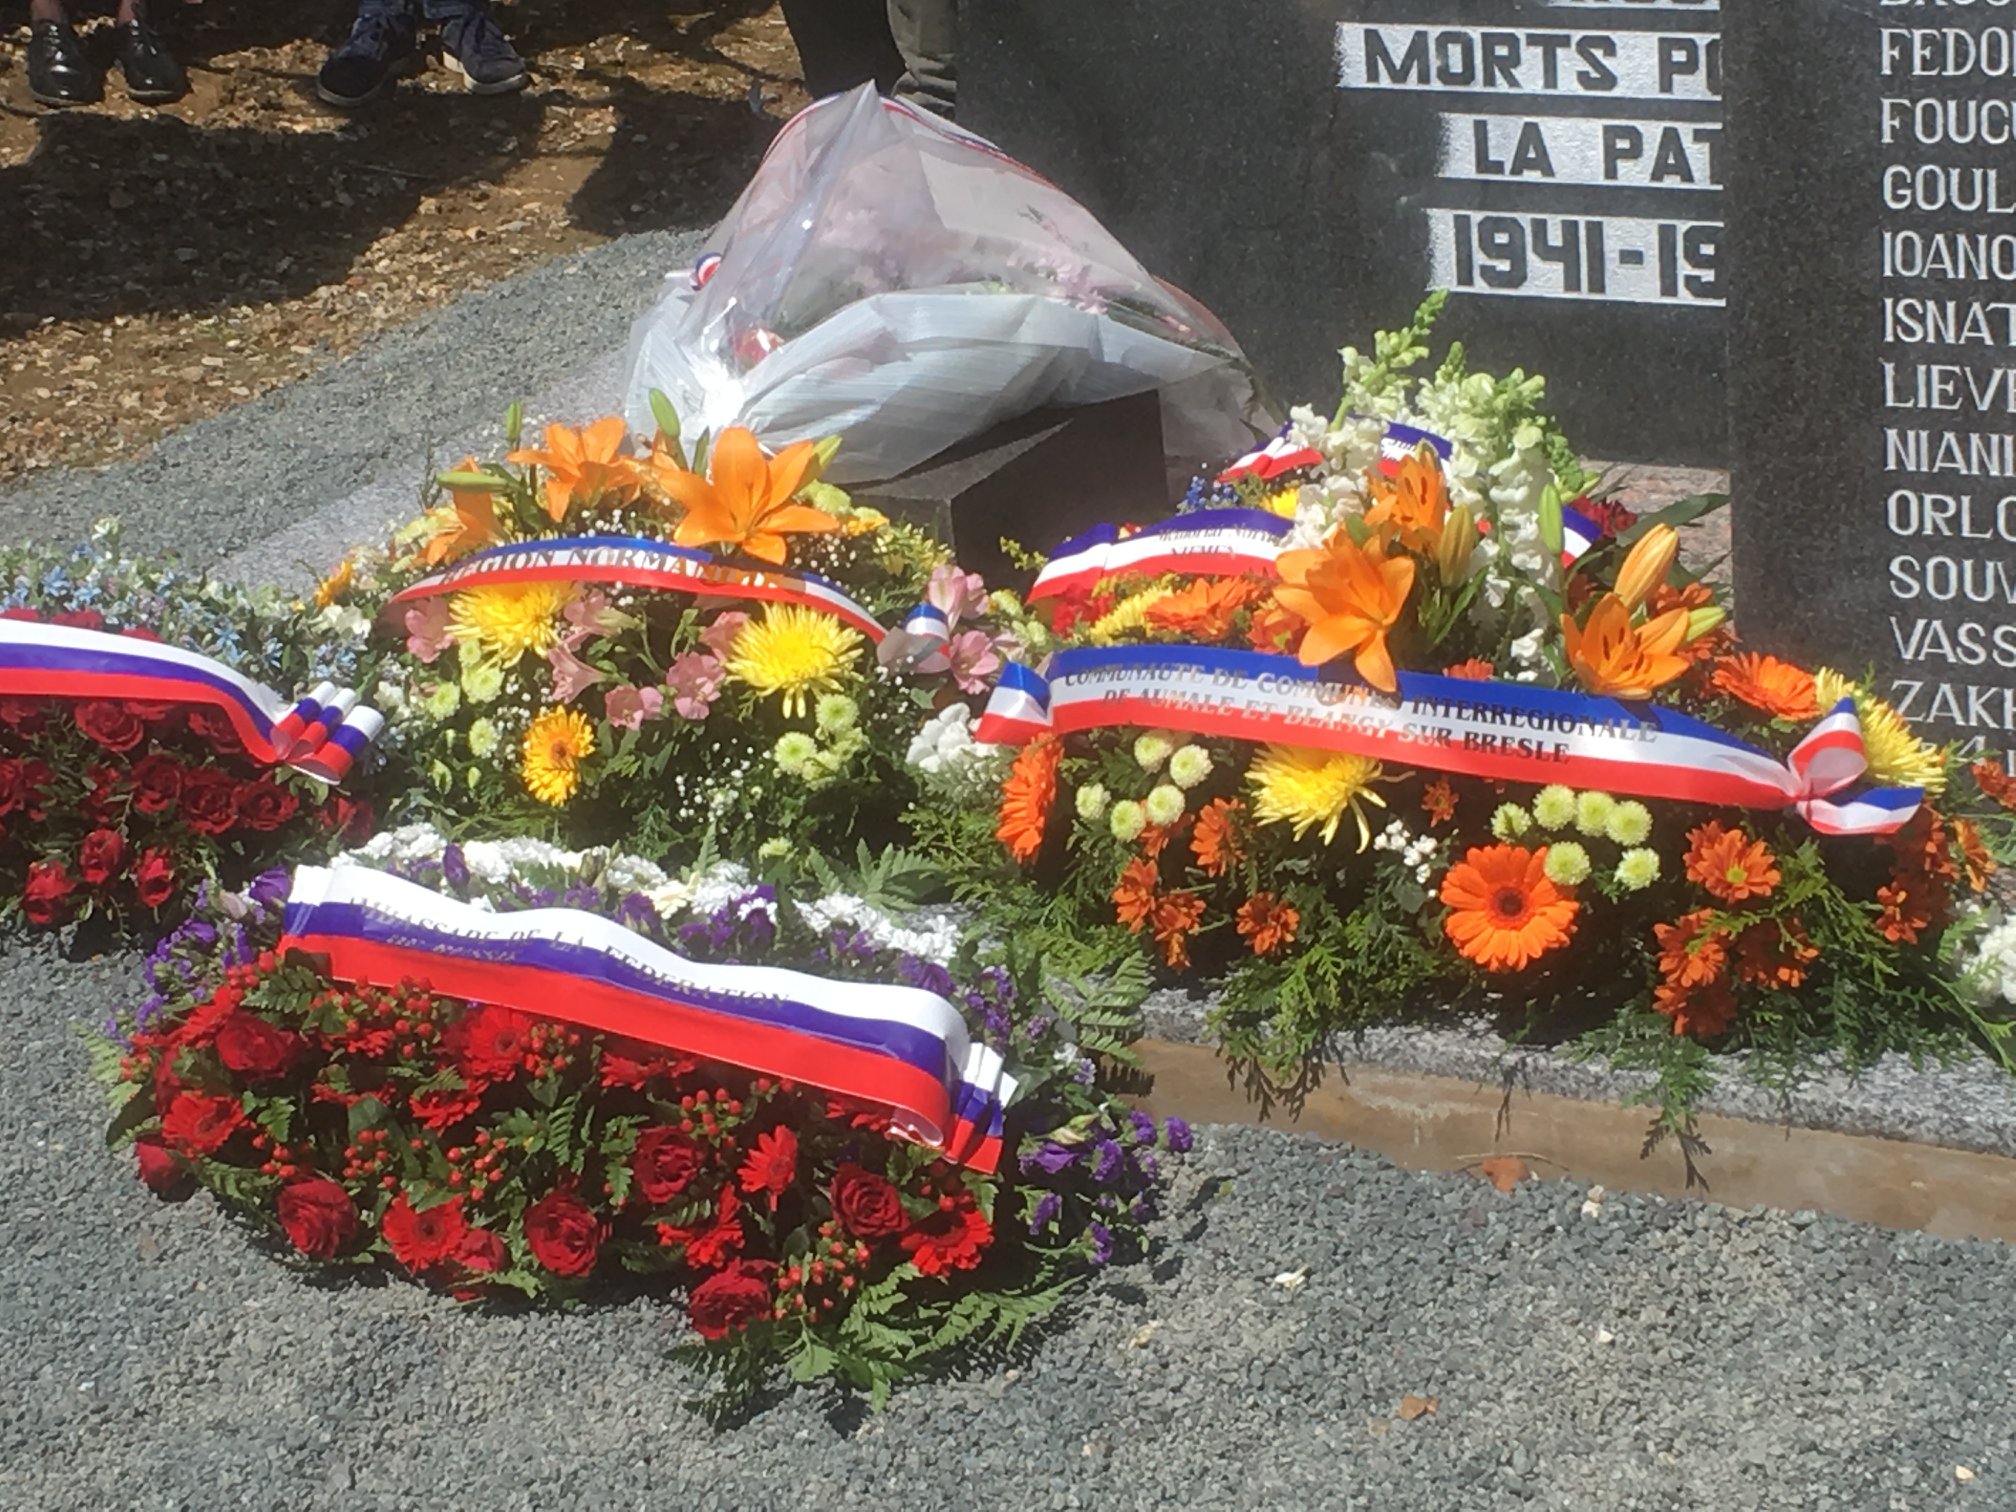 The grave at the end of the tribute ceremony